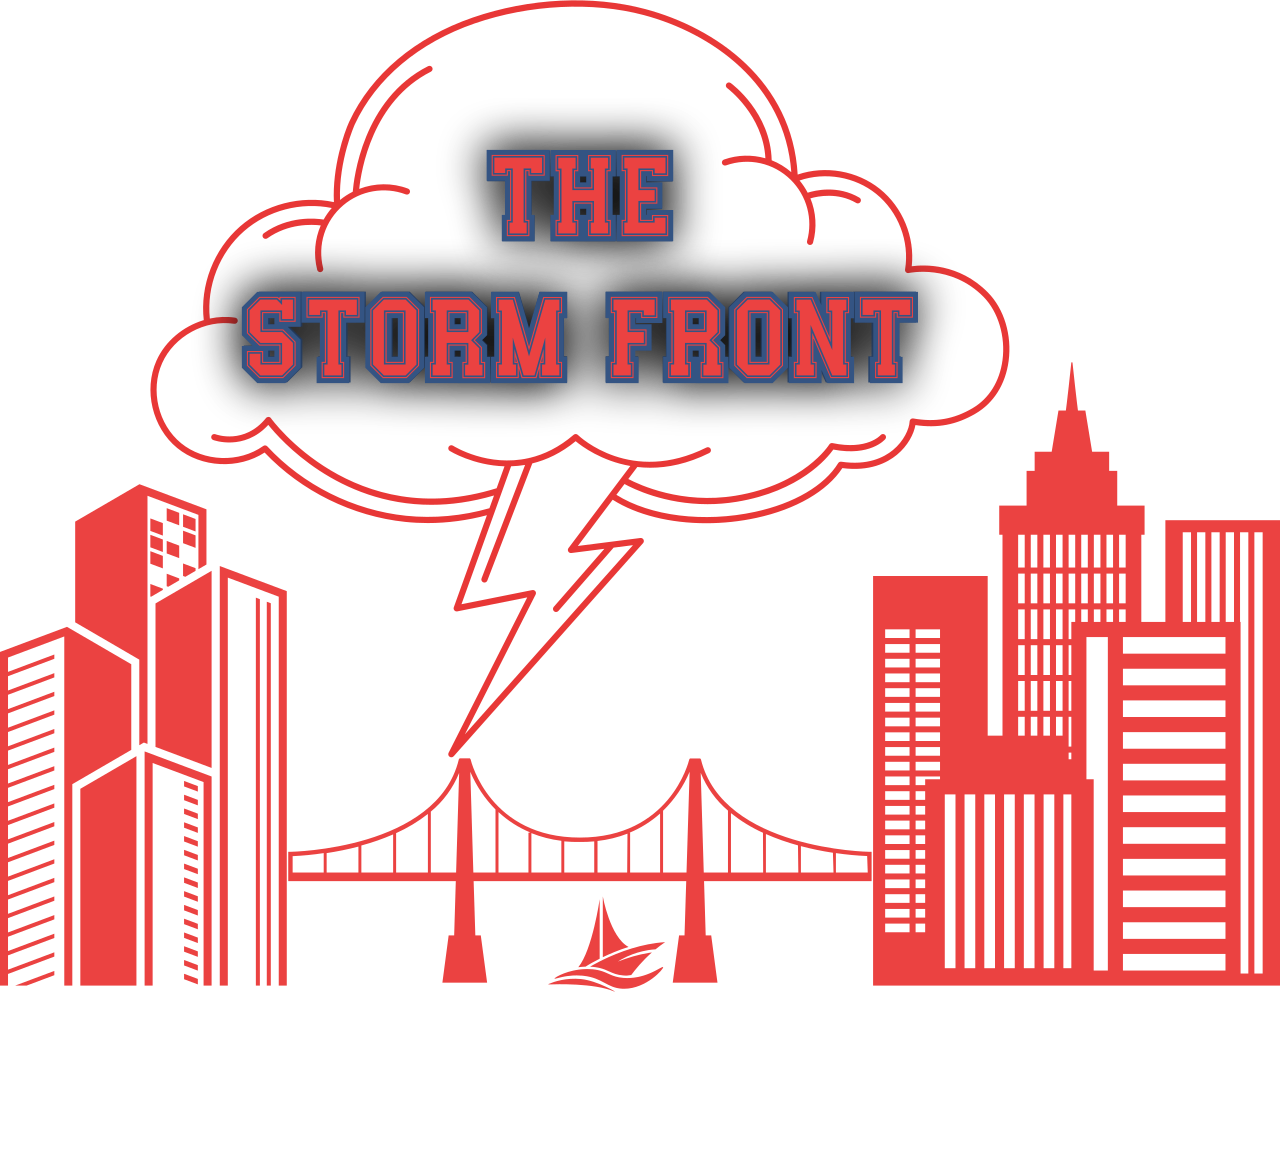 The
Storm Front's logo